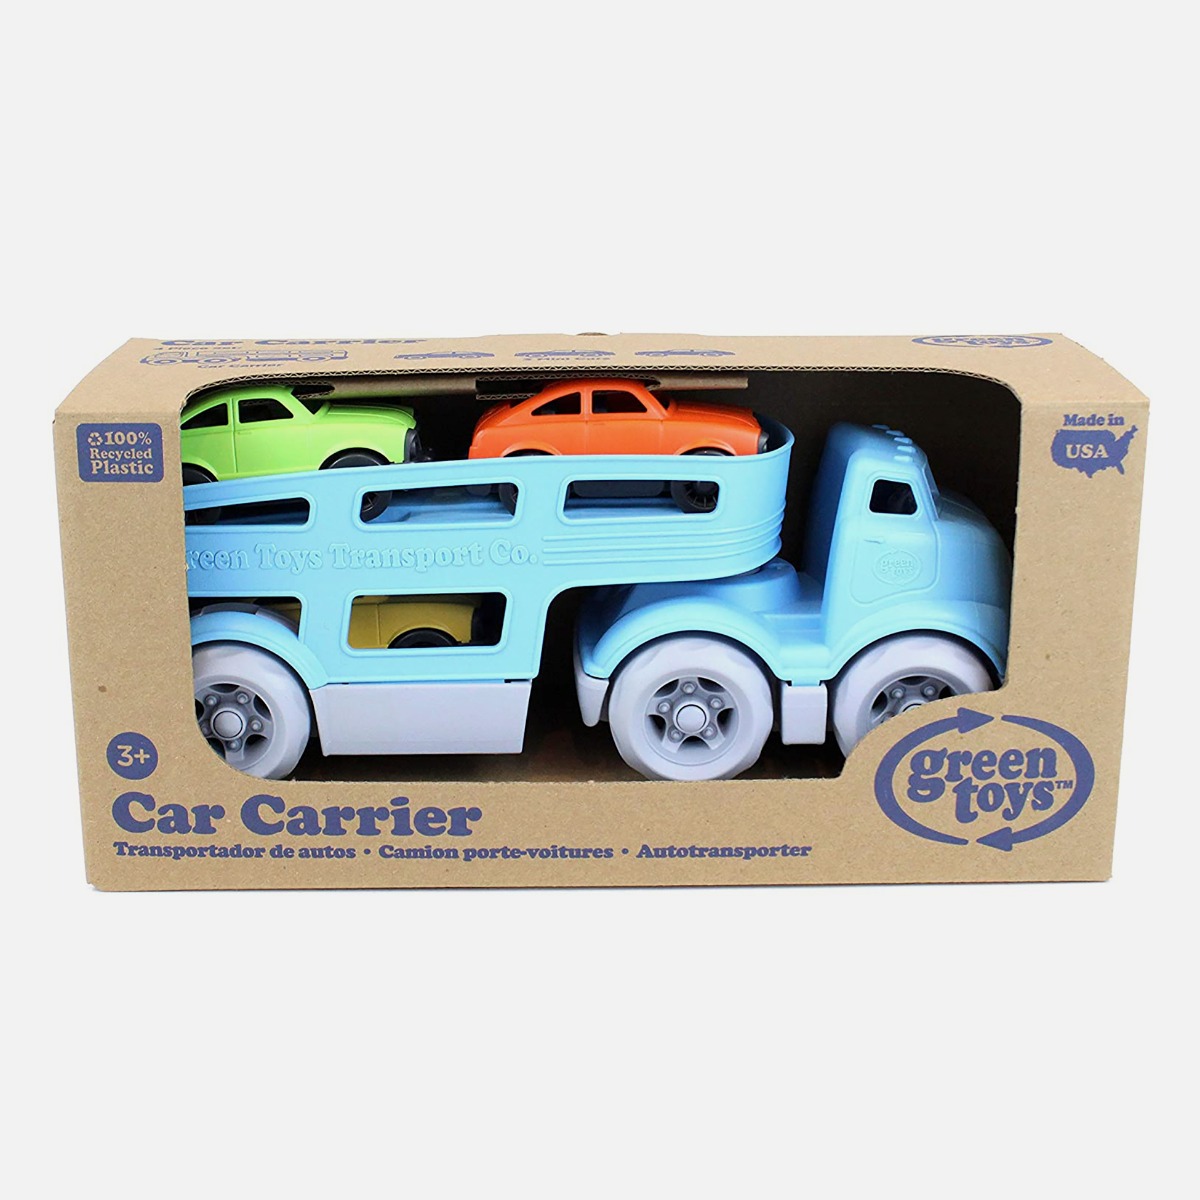 Car carrier toy truck